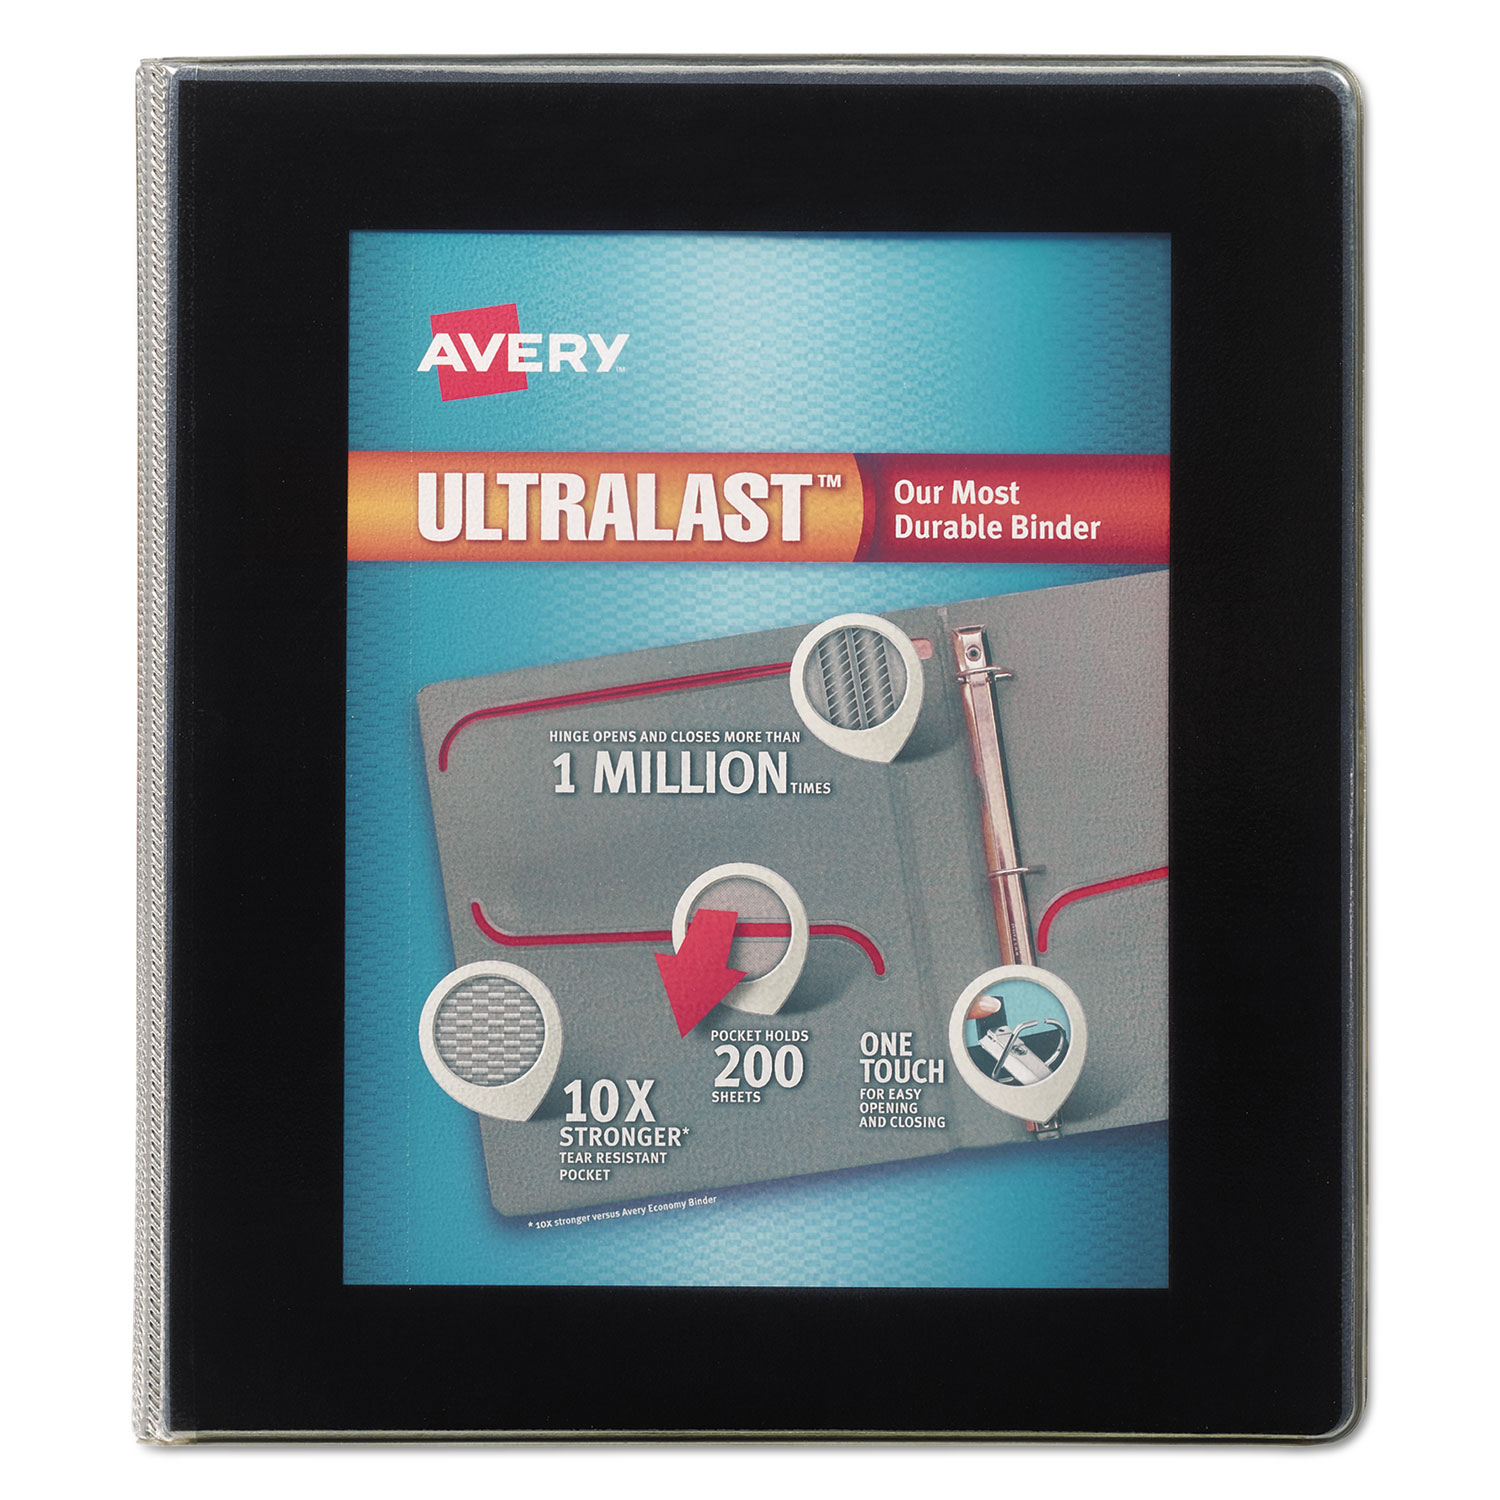  Avery 79710 UltraLast Heavy-Duty View Binder with One Touch Slant Rings, 3 Rings, 1 Capacity, 11 x 8.5, Black (AVE79710) 